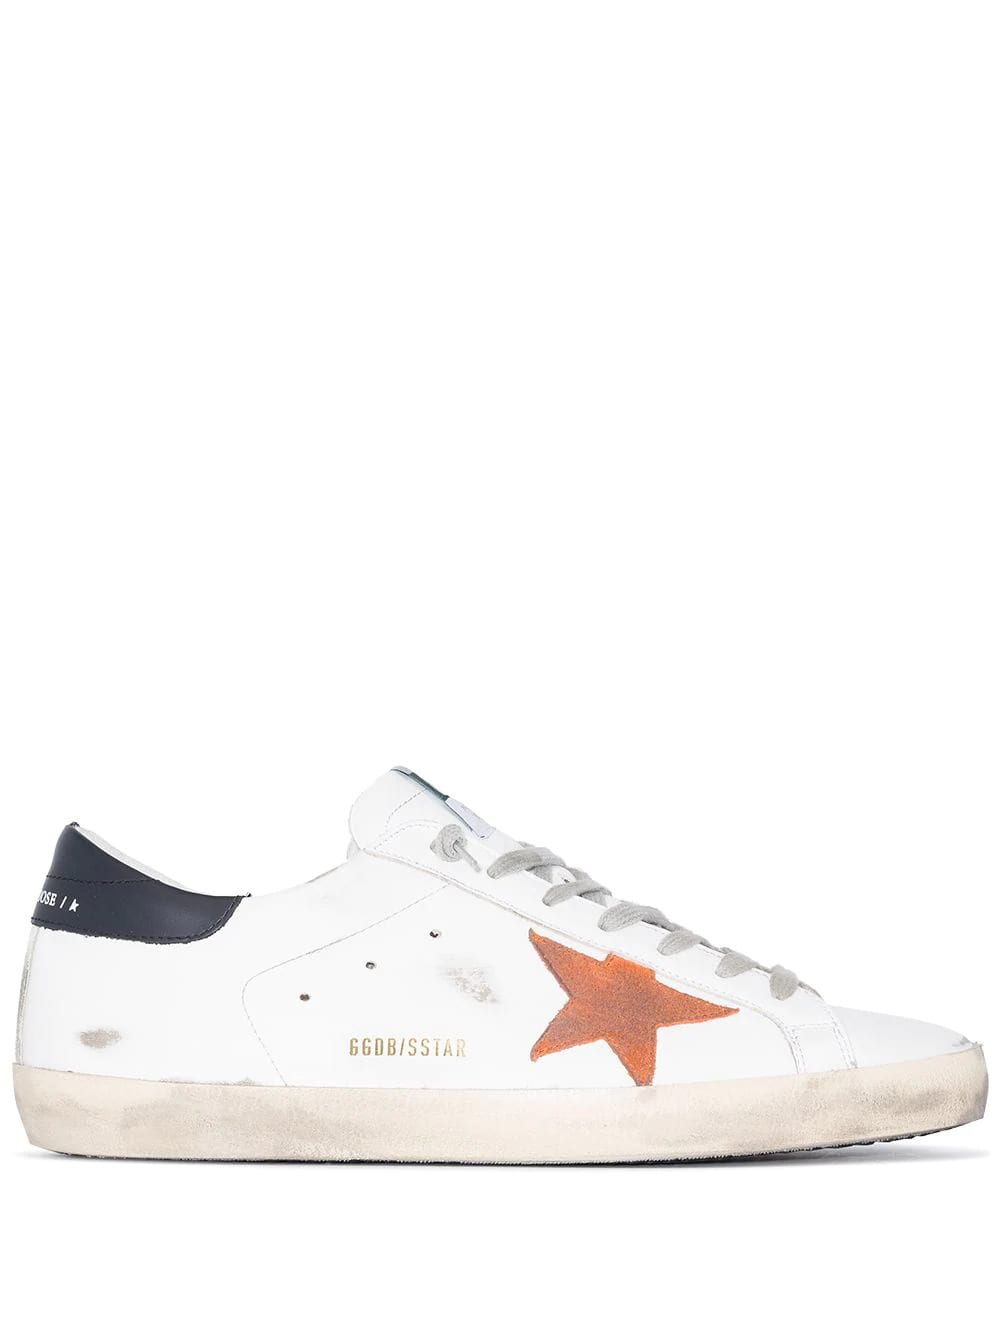 Golden Goose Man White Super-star Sneakers With Orange Star And Black Spoiler